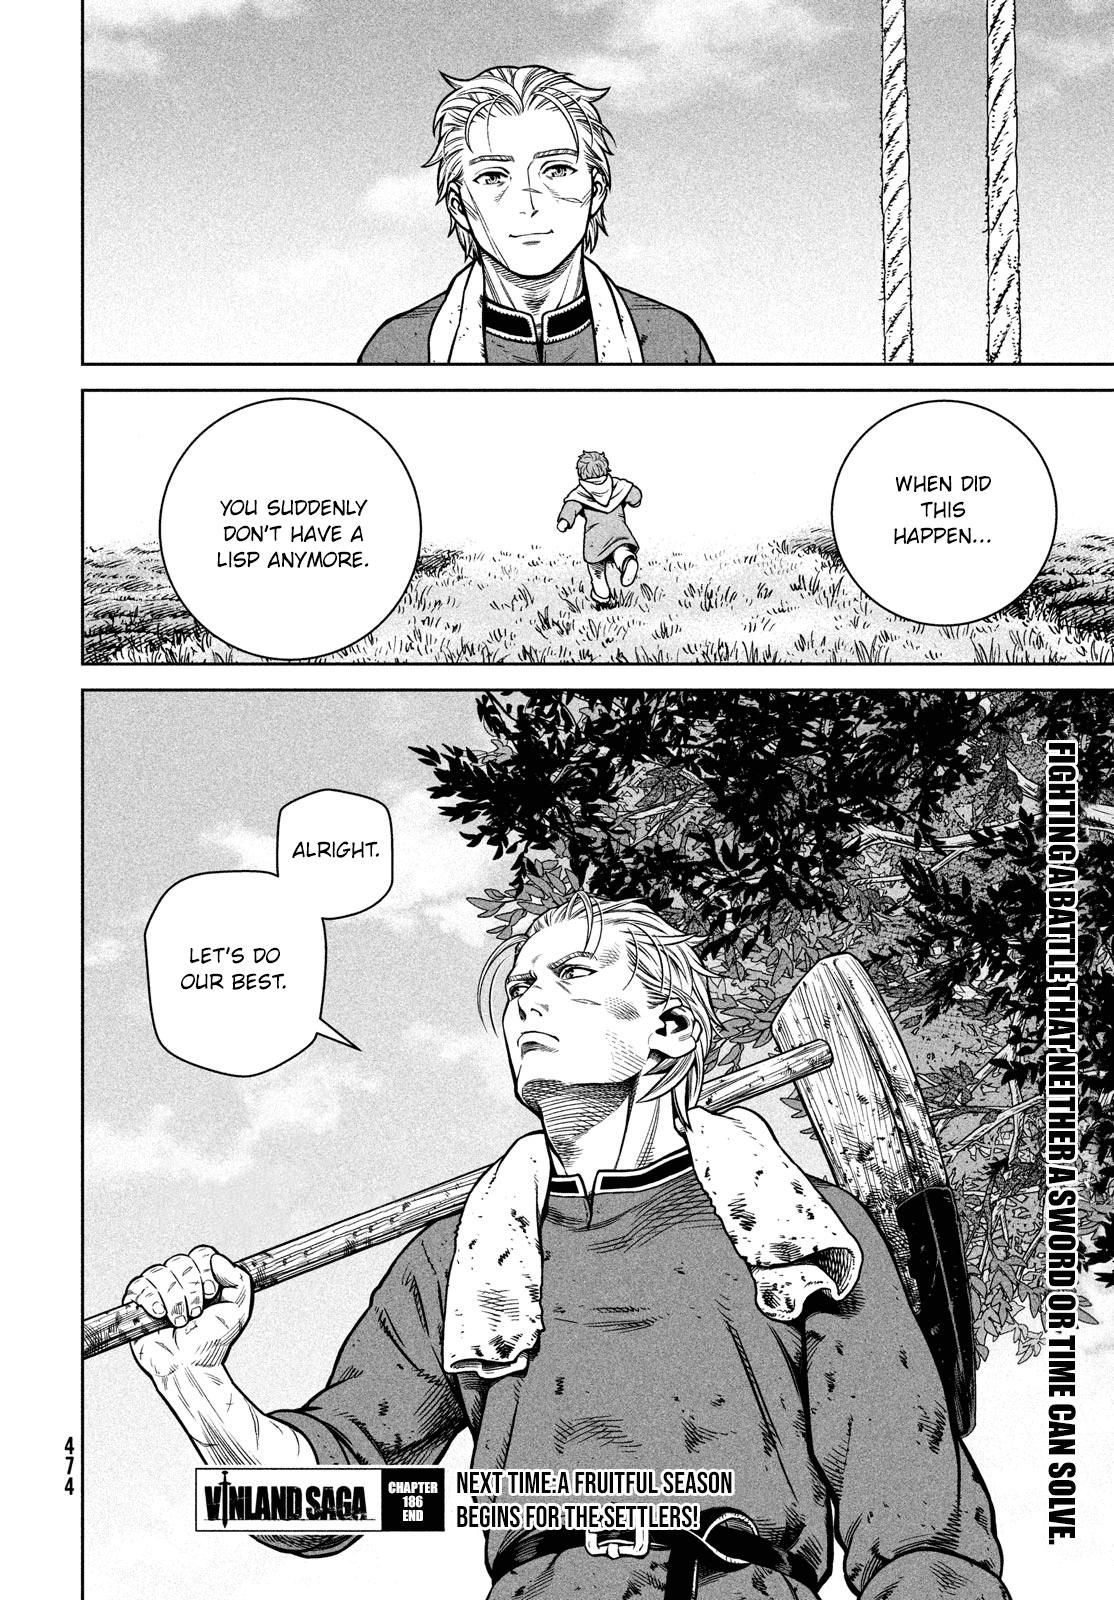 vinland saga 186, vinland saga 186, Read vinland saga 186, vinland saga 186 Manga, vinland saga 186 english, vinland saga 186 raw manga, vinland saga 186 online, vinland saga 186 high quality, vinland saga 186 chapter, vinland saga 186 manga scan